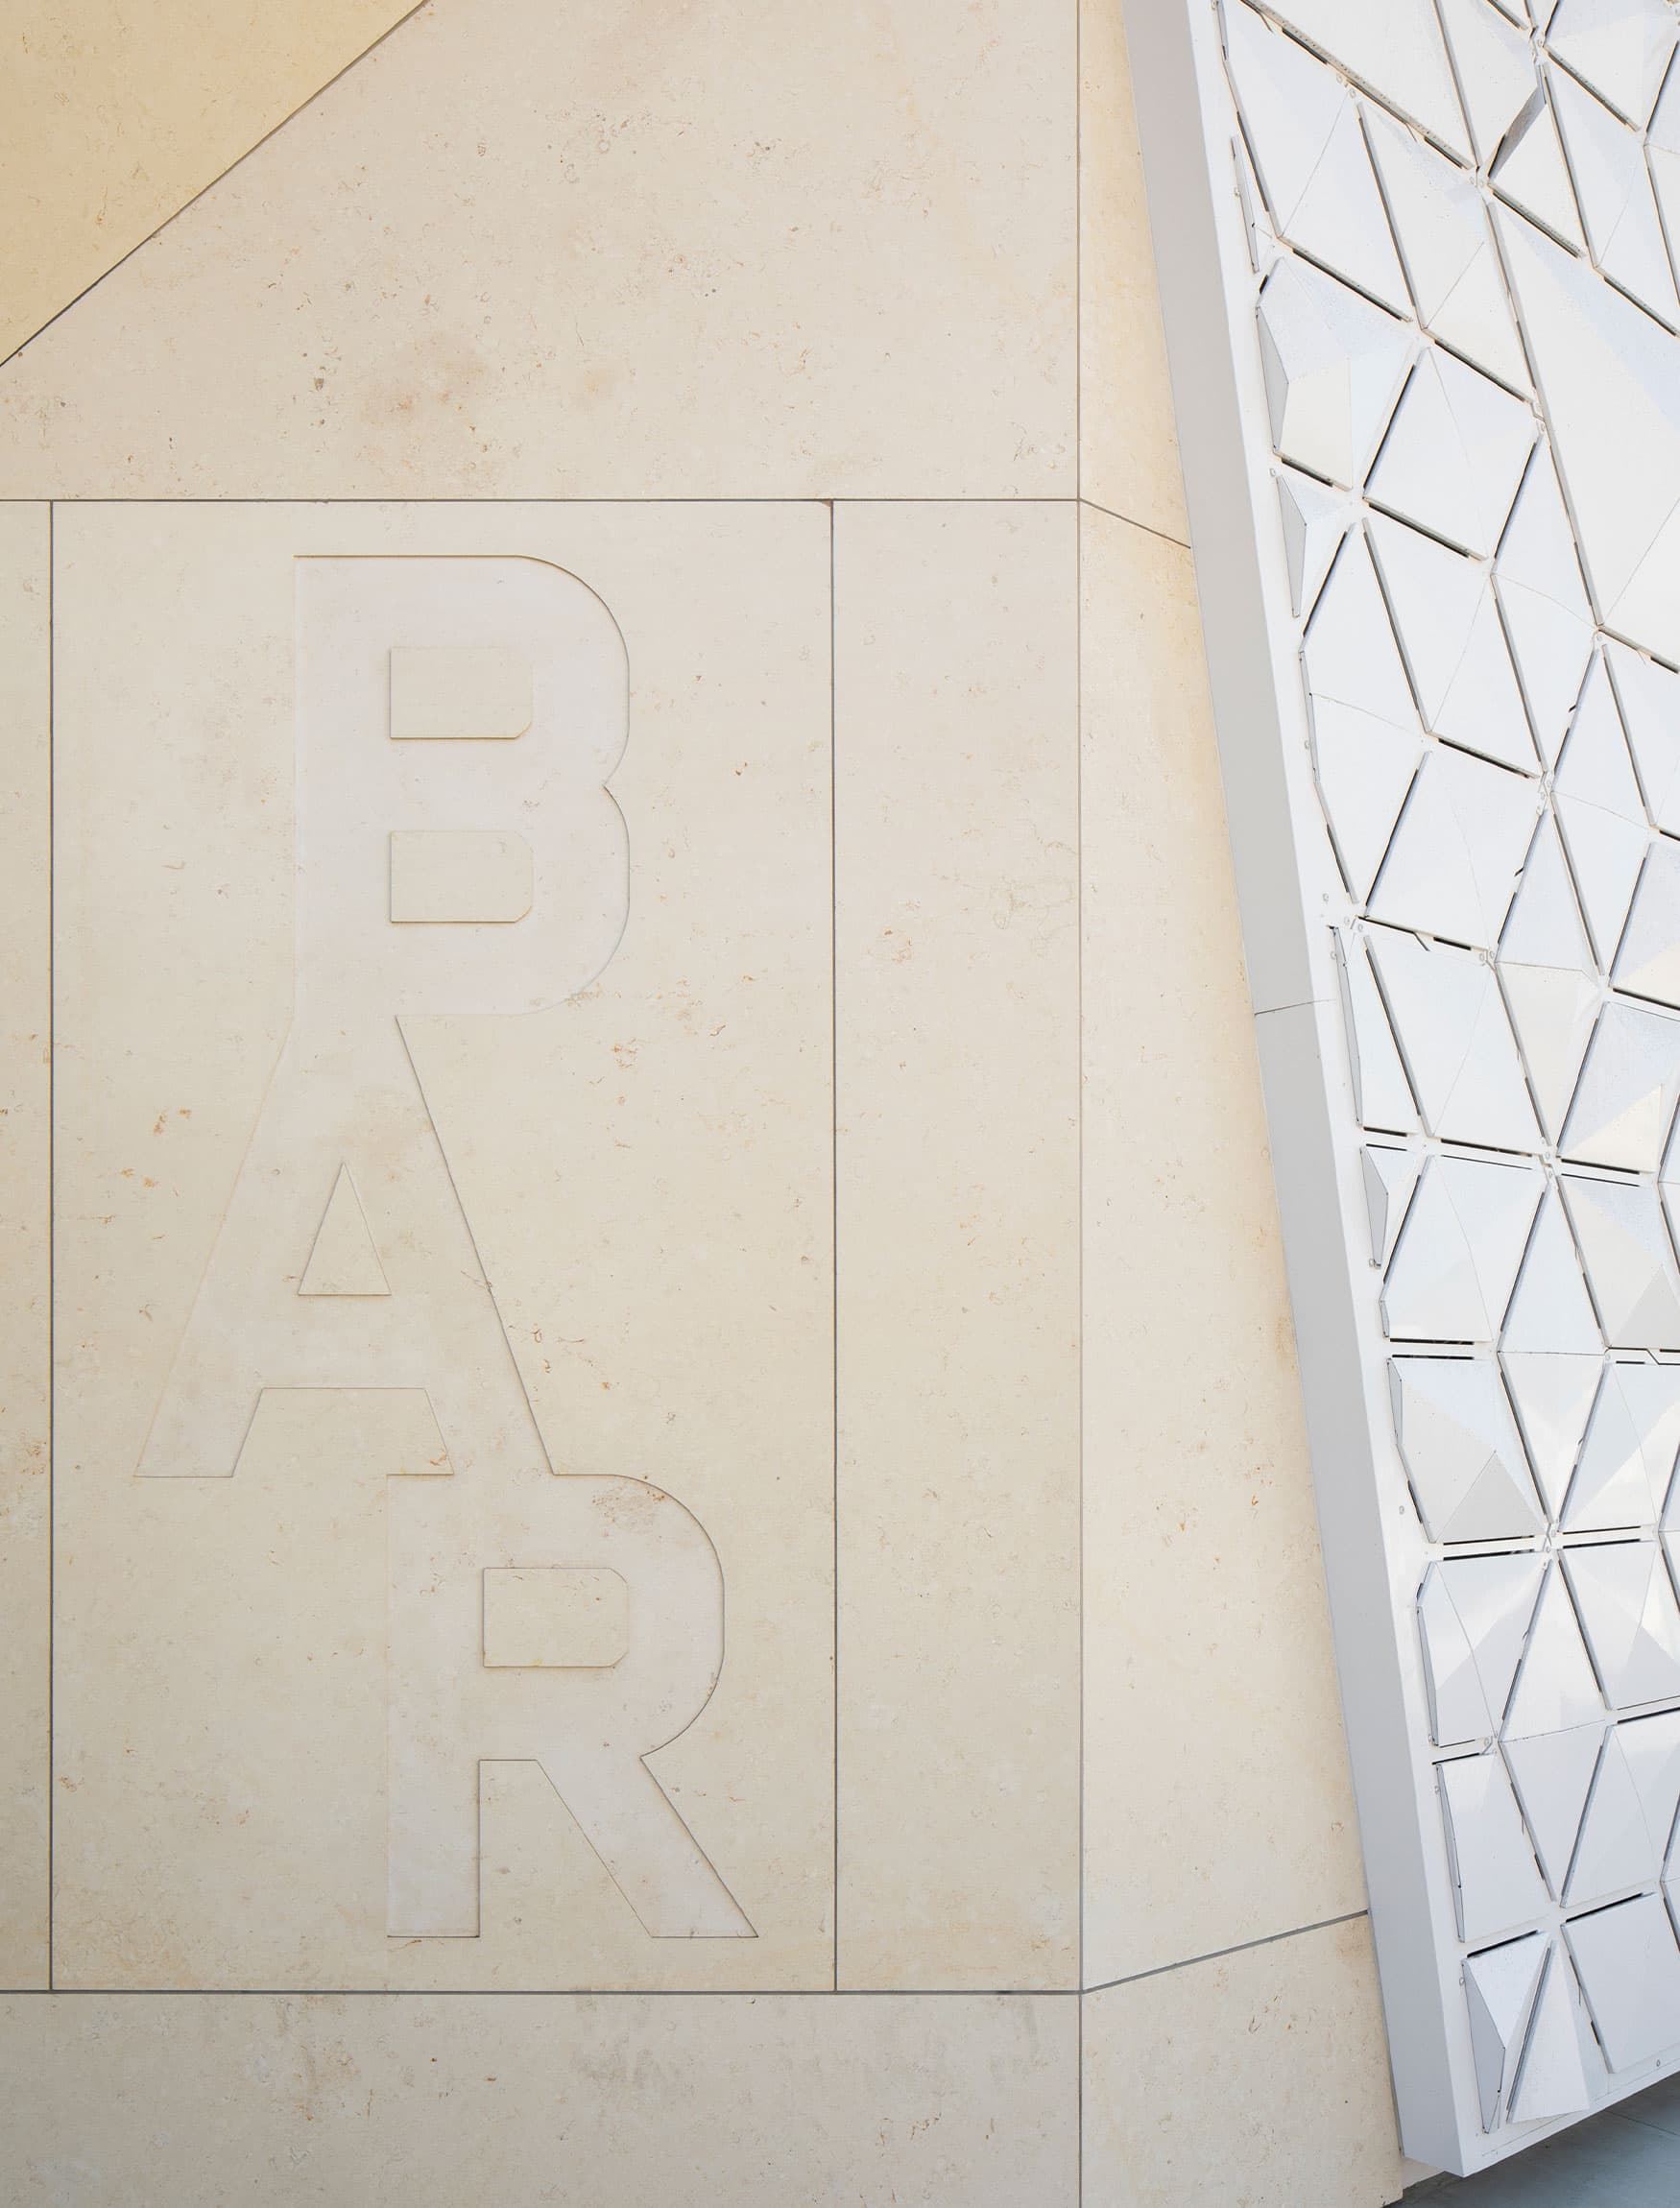 Concrete wall engraved logo signage. Exterior building identity for the BAR Center in Venice, California.